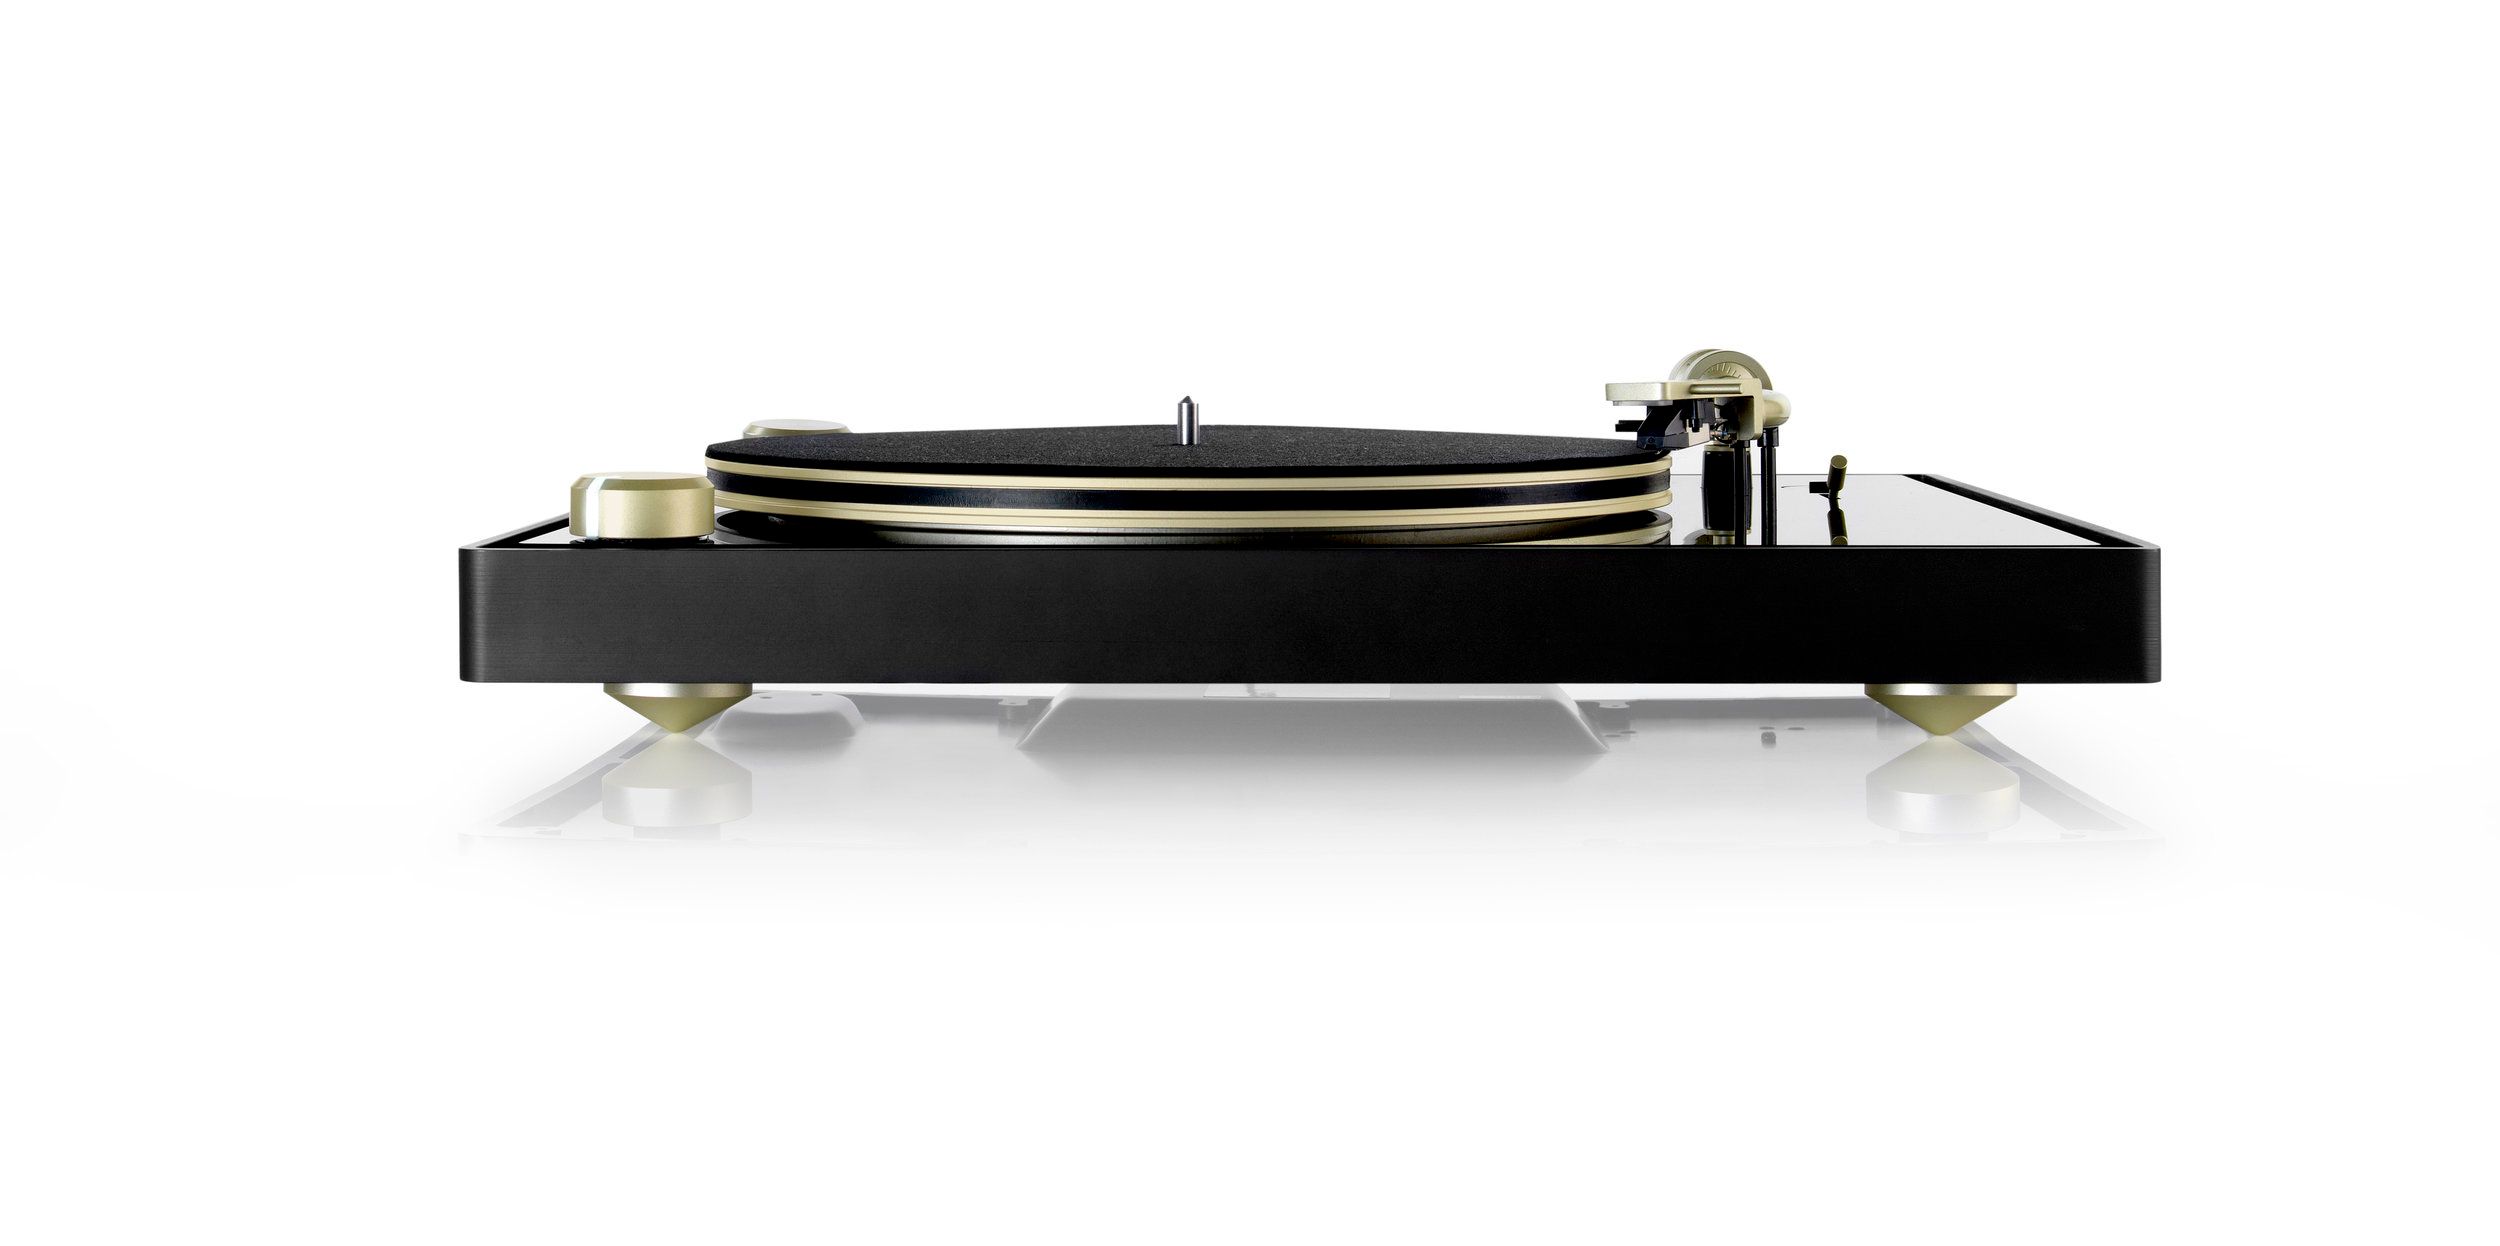 Black record player with a gold needle arm and other gold hardware